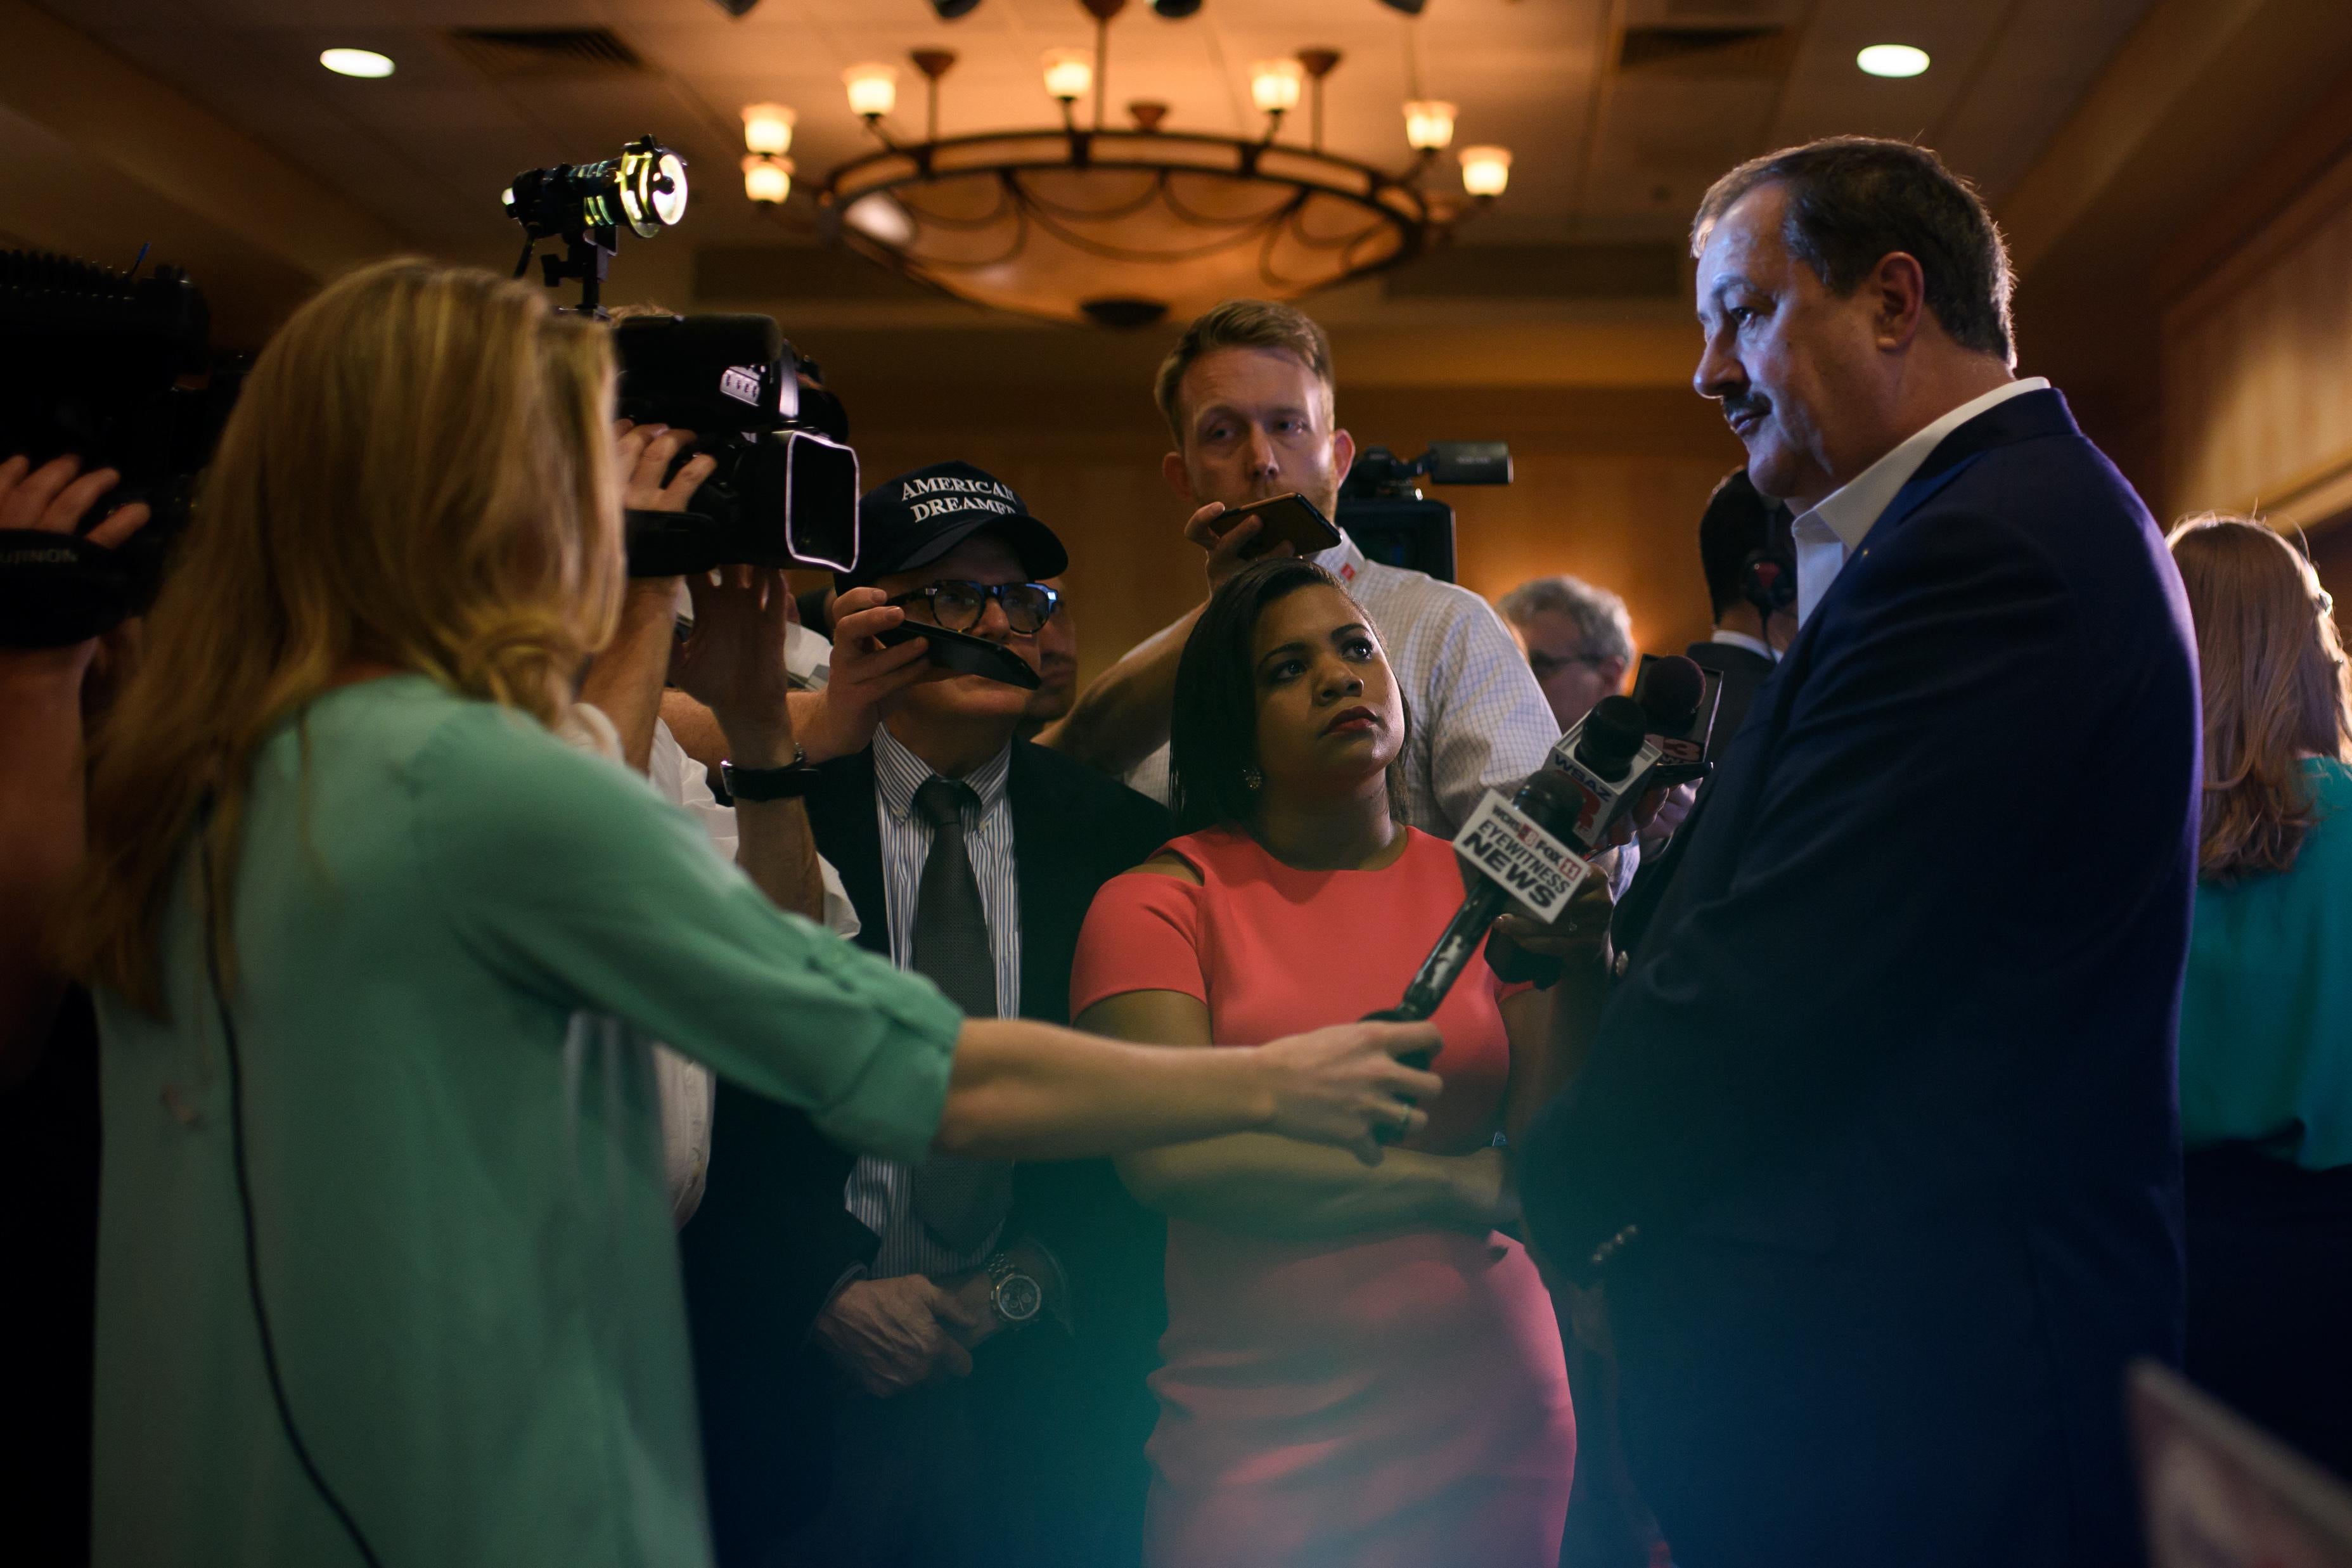 CHARLESTON, WV - MAY 08: U.S. Senate Republican primary candidate Don Blankenship is interviewed by media outlets following the closing of the polls May 8, 2018 in Charleston, West Virginia. President Donald Trump weighed in on the Republican primary yesterday in a tweet, urging West Virginia to vote for Blankenship's opponents, declaring the former coal executive 'can't win the General Election . . . '  (Photo by Jeff Swensen/Getty Images)